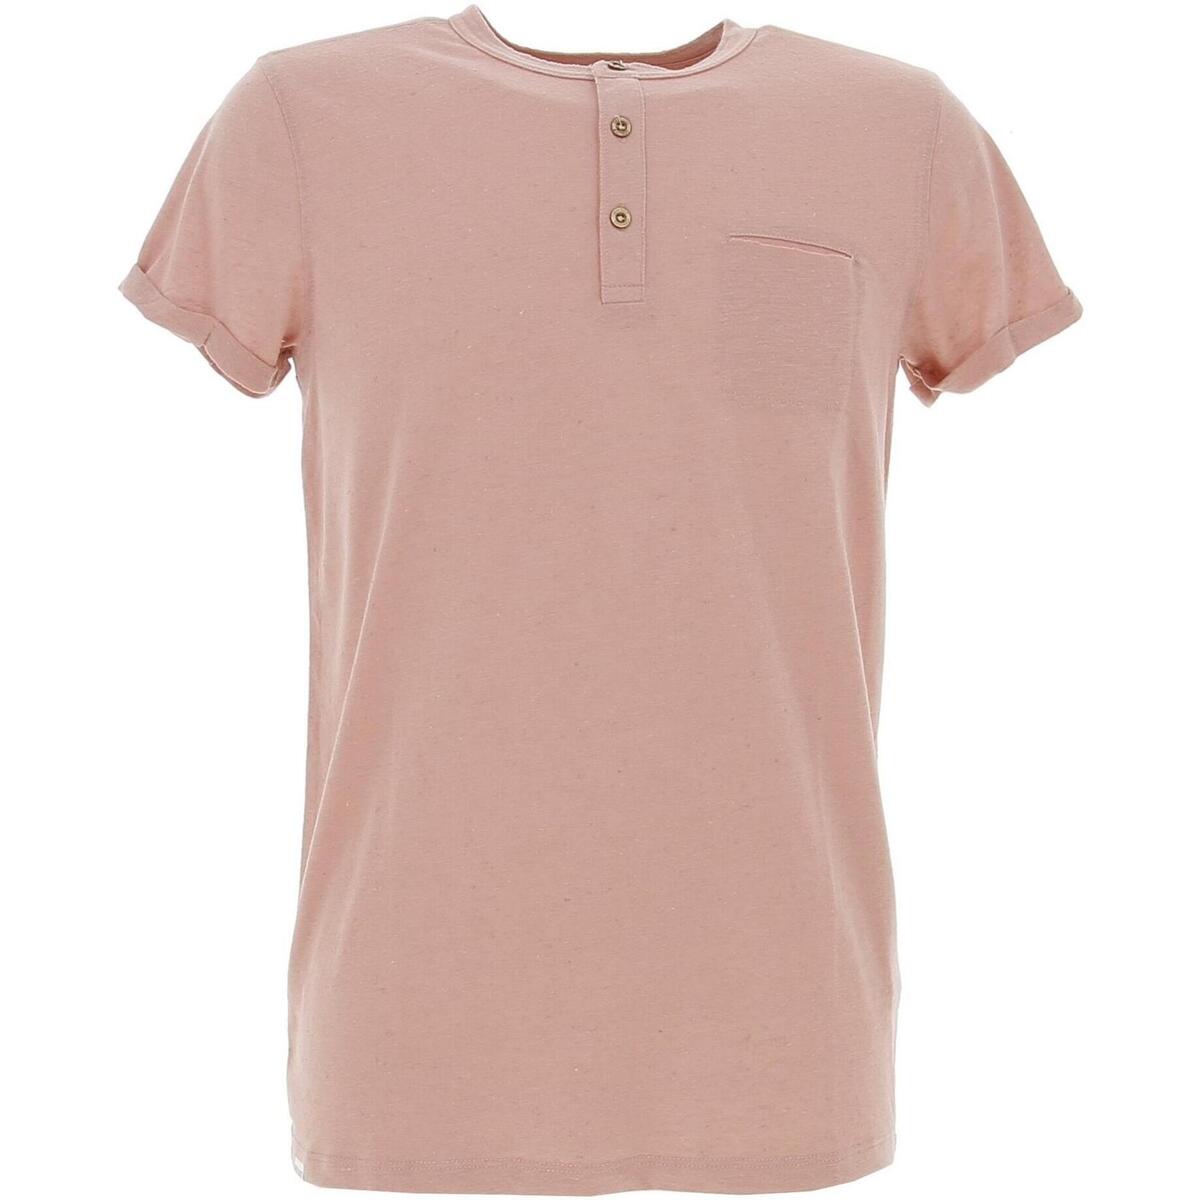 Vêtements Homme T-shirts manches courtes Deeluxe Gintonic ts Rose